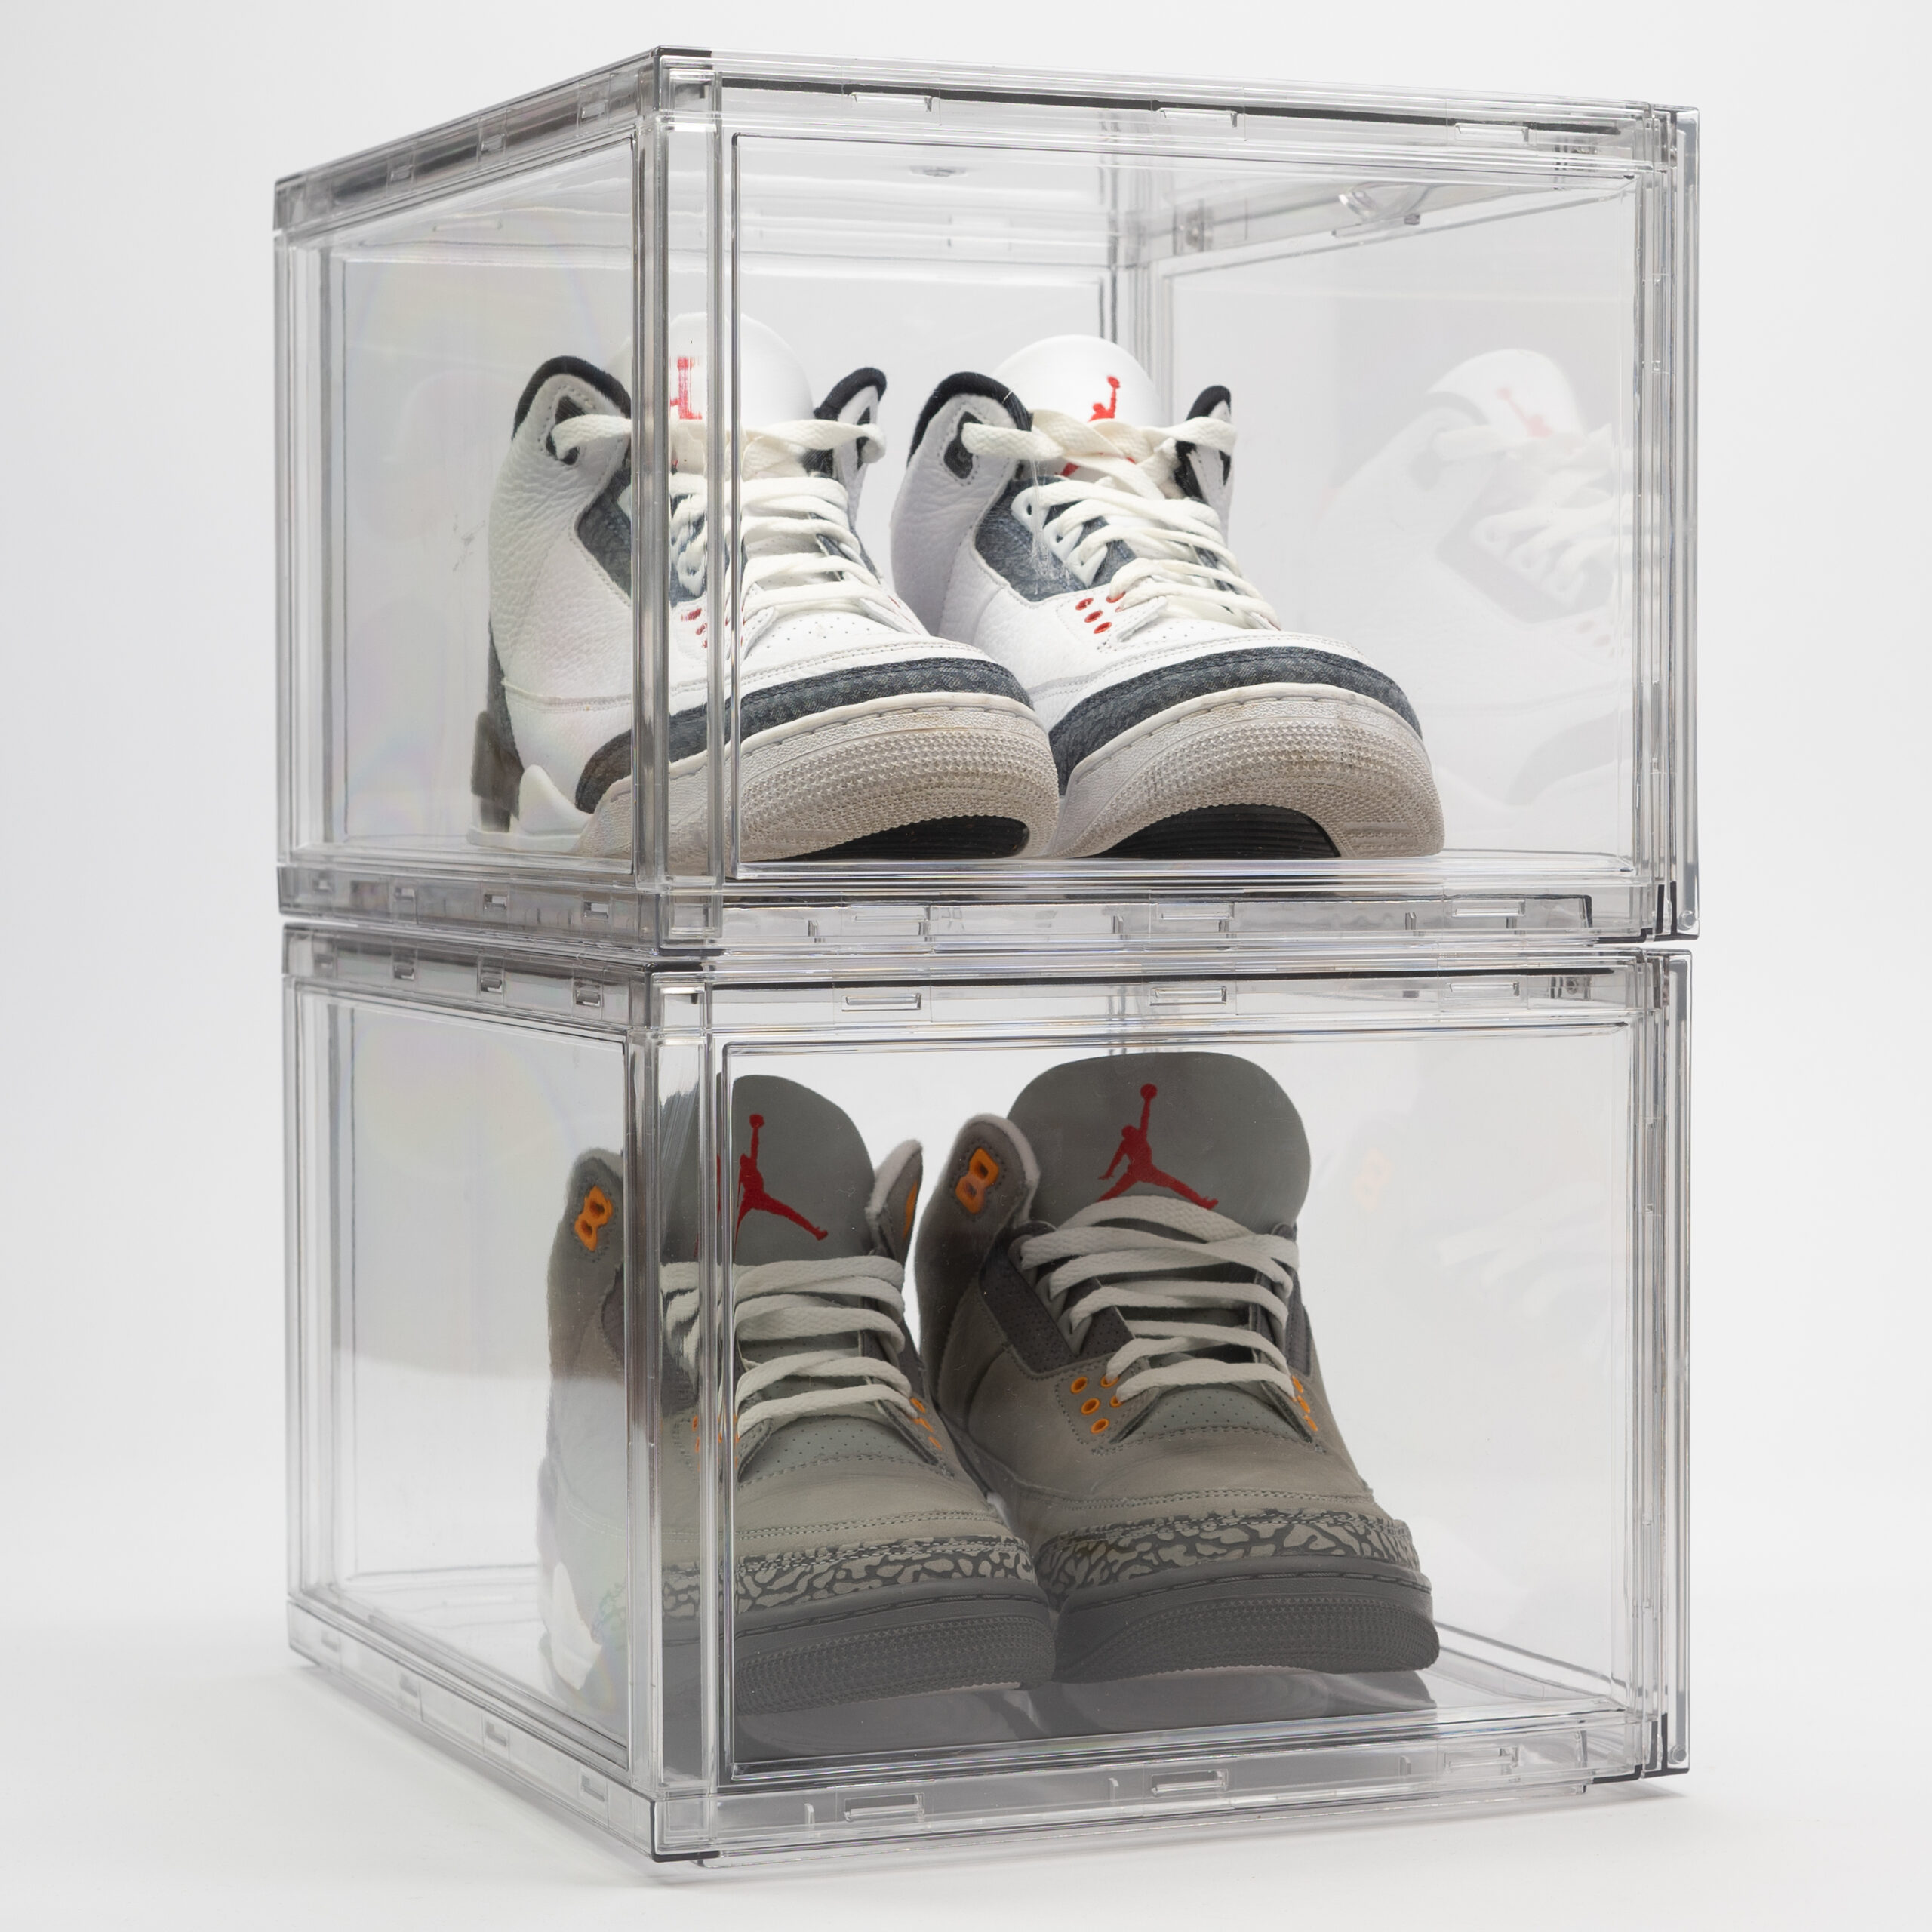 Acrylic 360° | Large Ultra Clear Side Drop Shoe Crates | X2 Pack